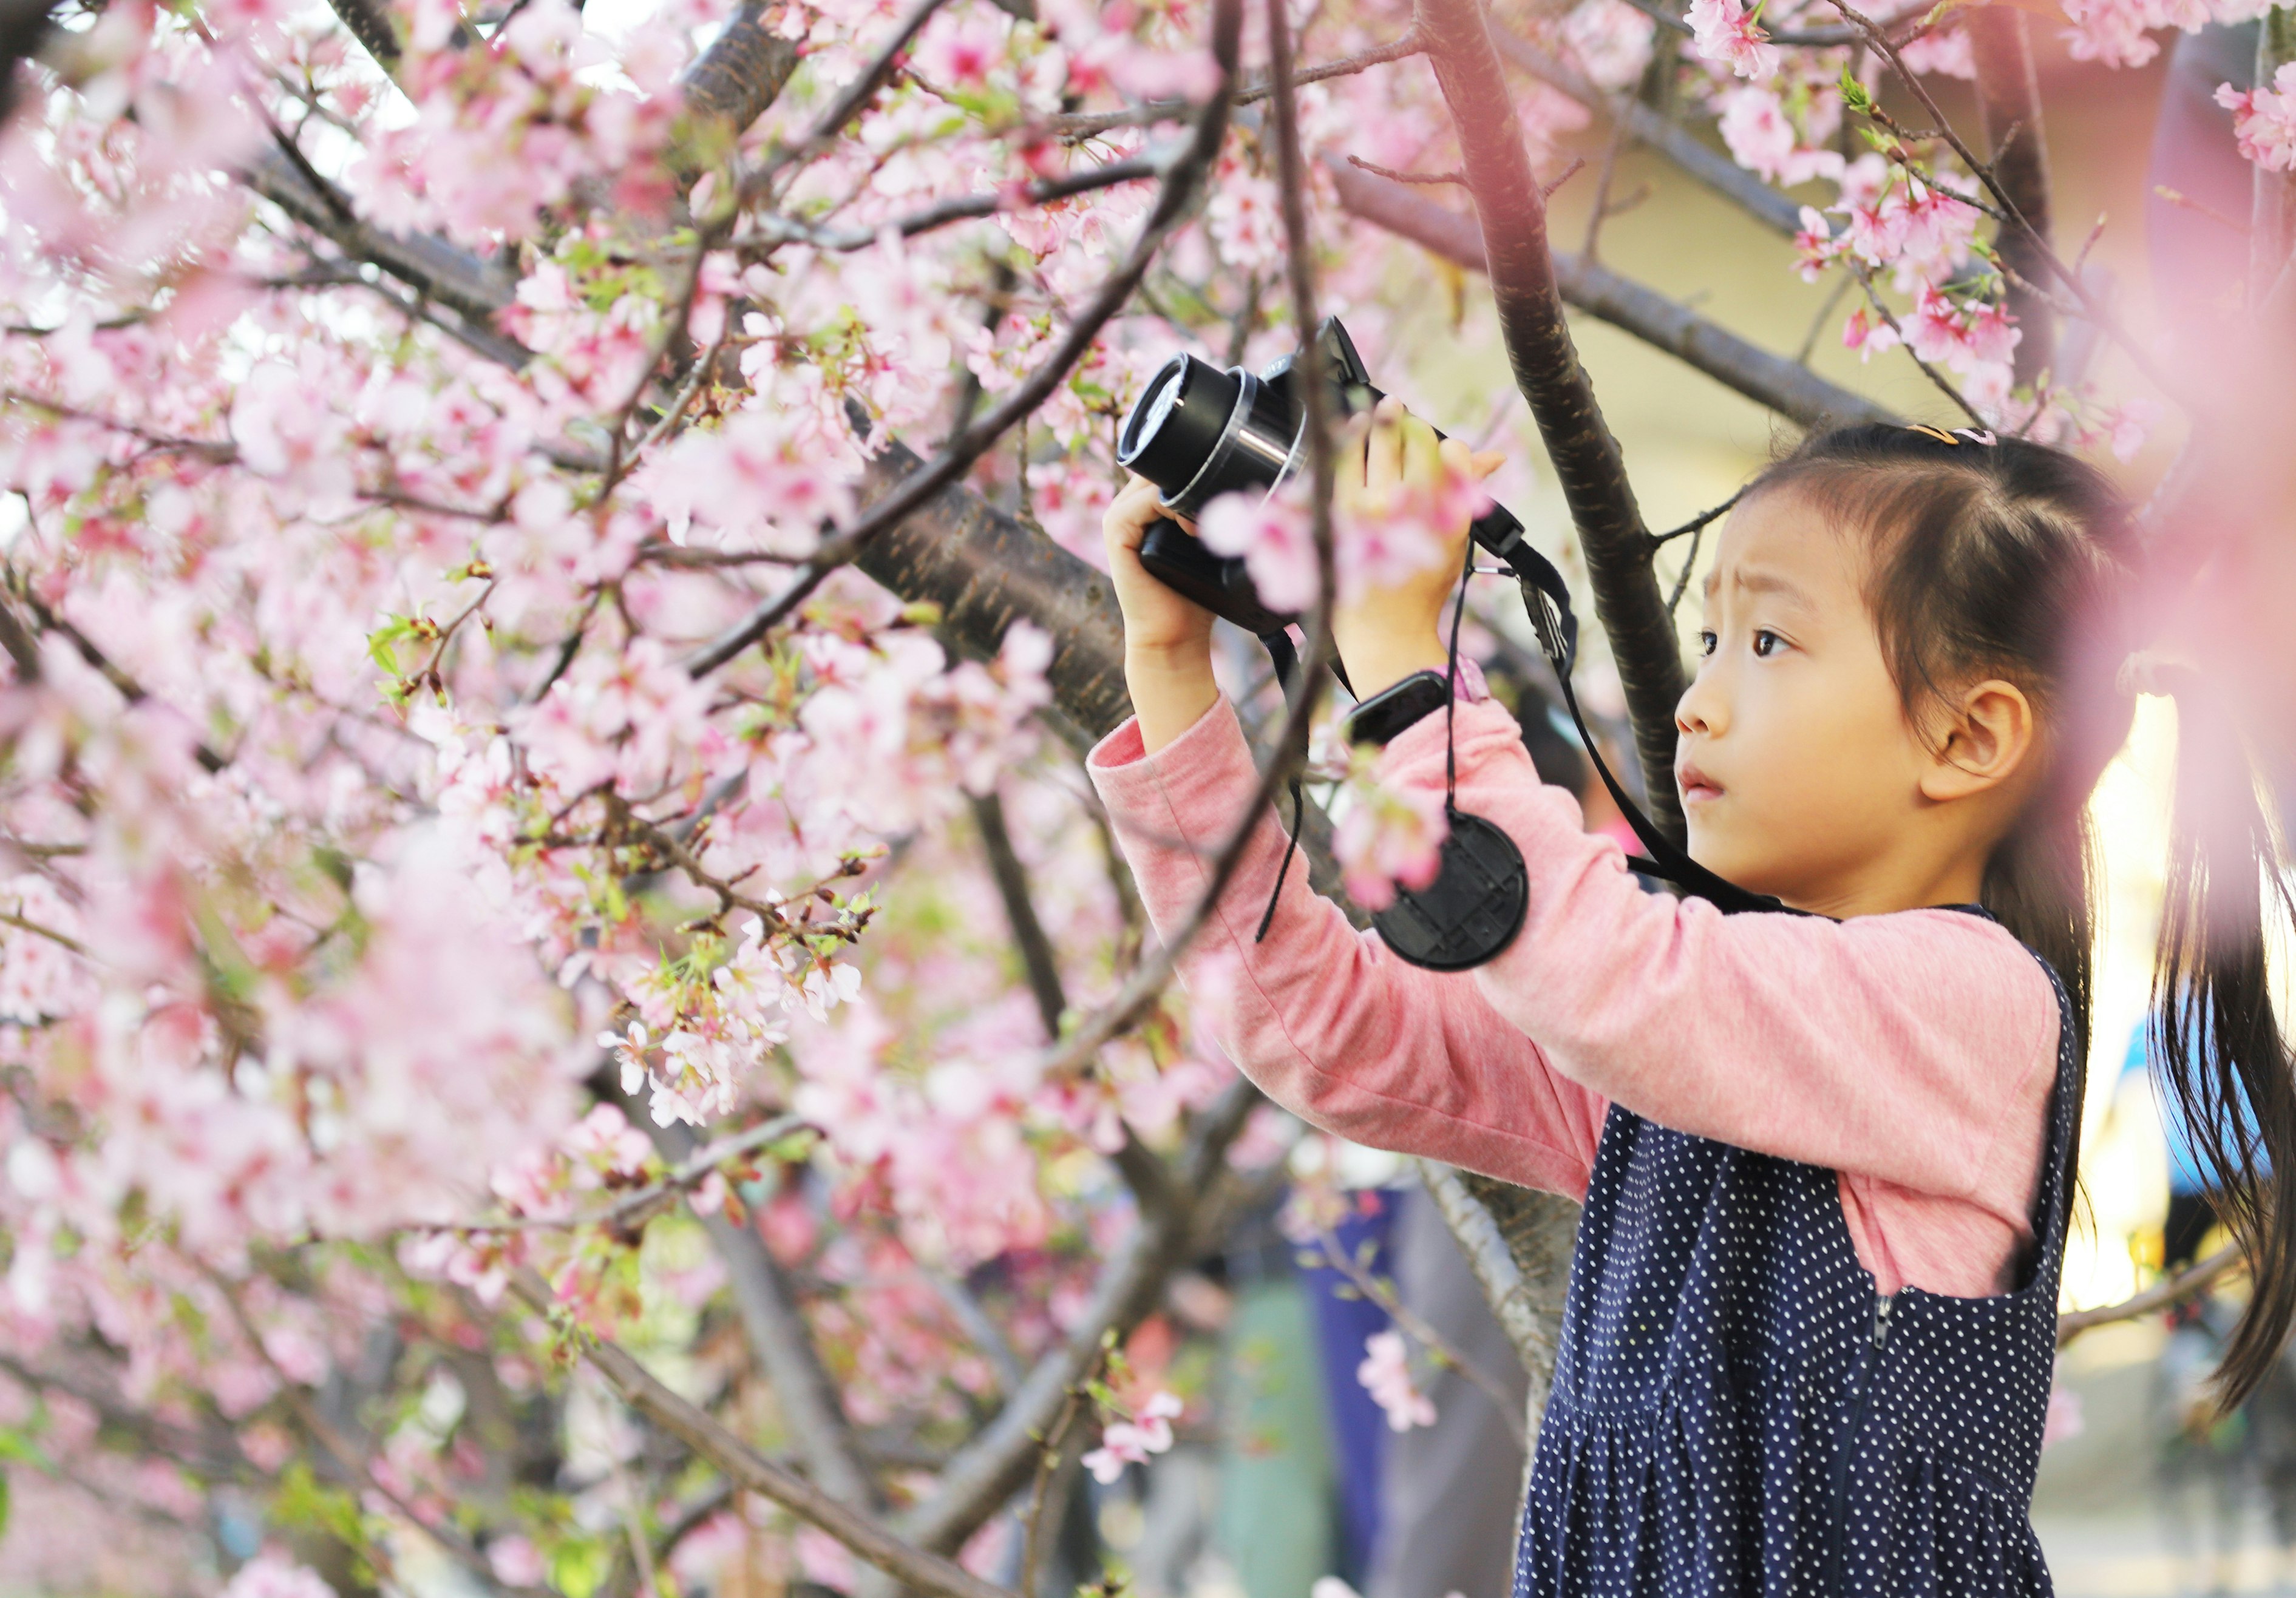 A young Asian girl take photos with a digital camera under Cherry trees.